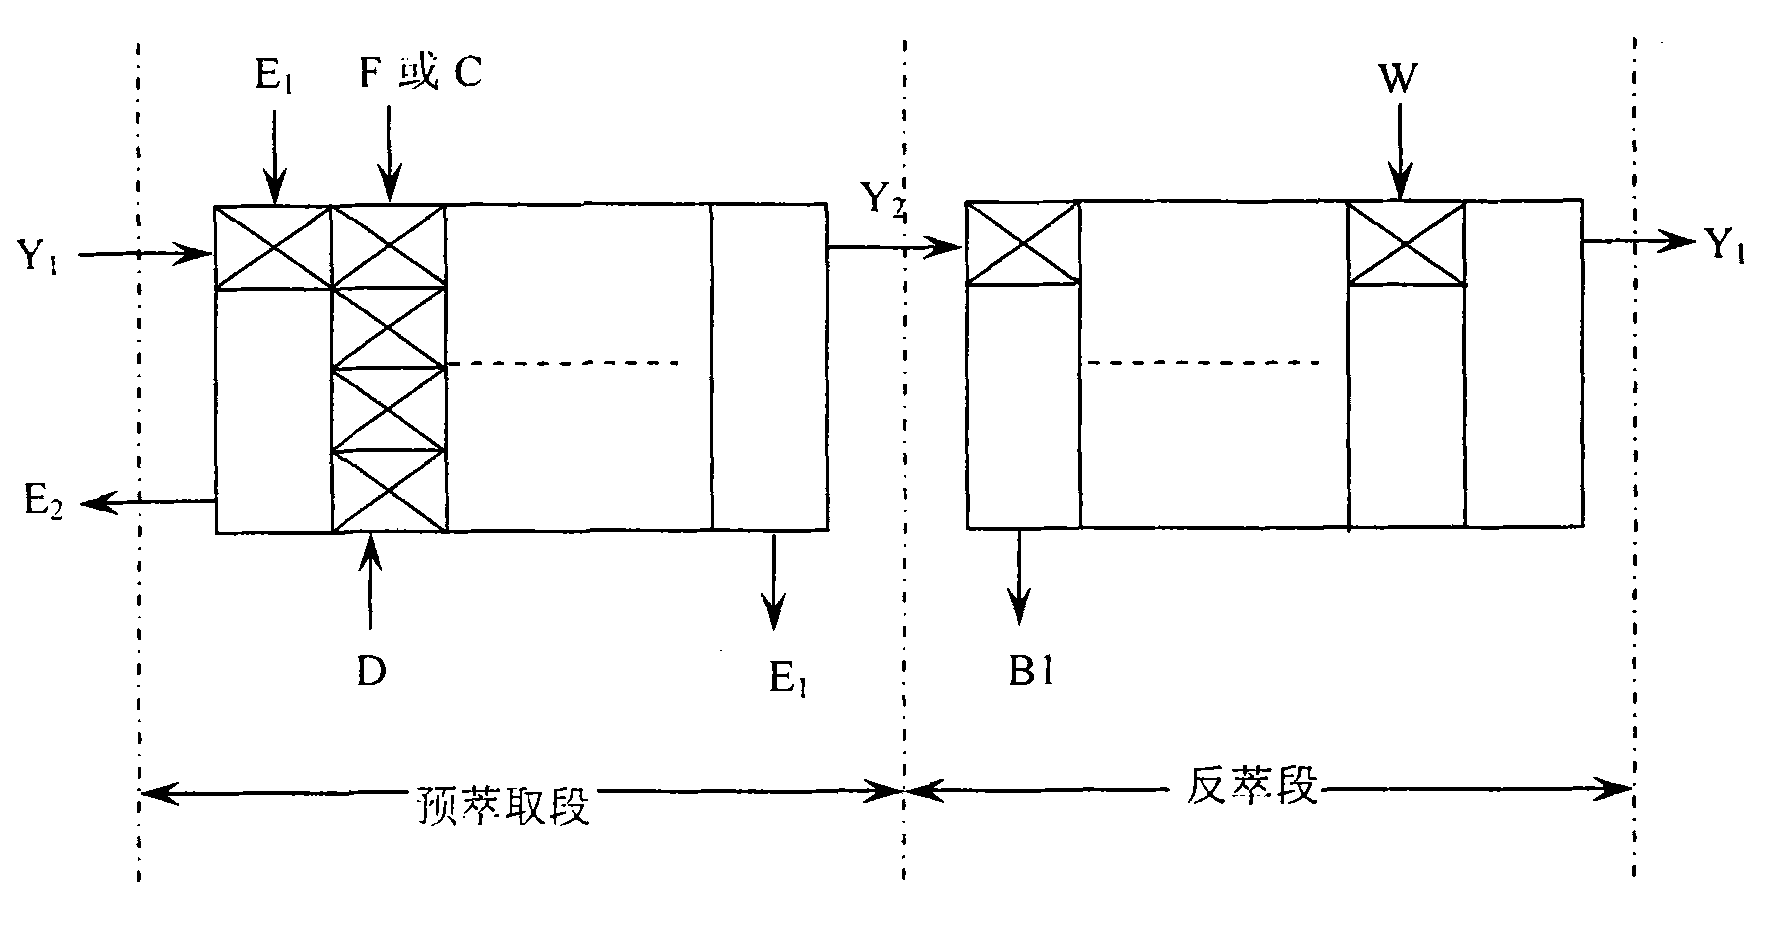 Process for extracting and separating rare-earth elements